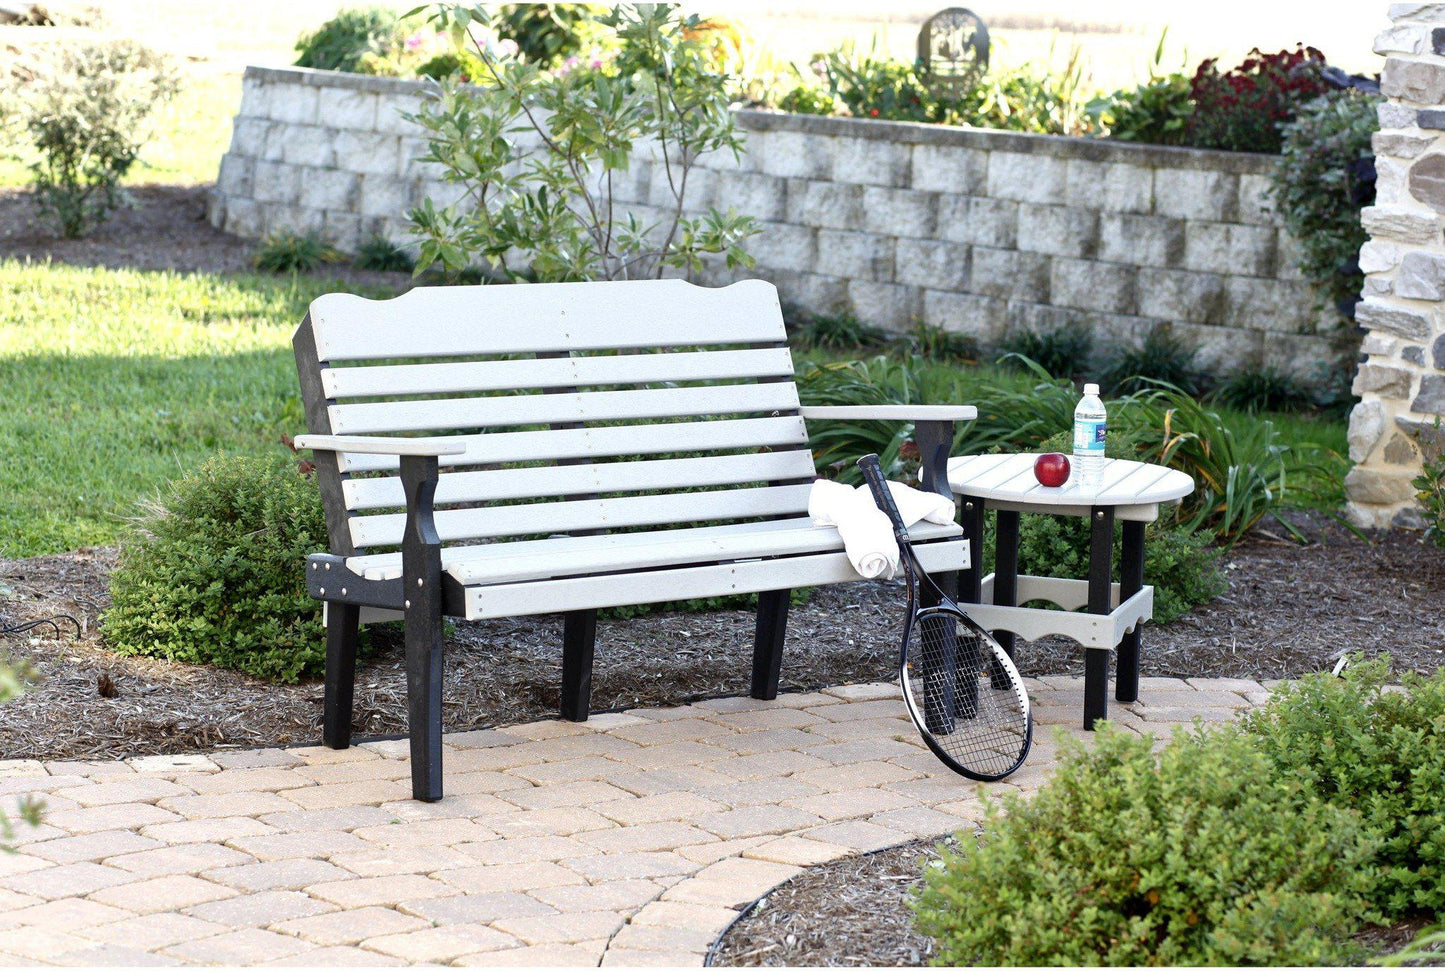 Leisure Lawns Amish West Chester Poly 4' Park Bench Model #420 - LEAD TIME TO SHIP 6 WEEKS OR LESS